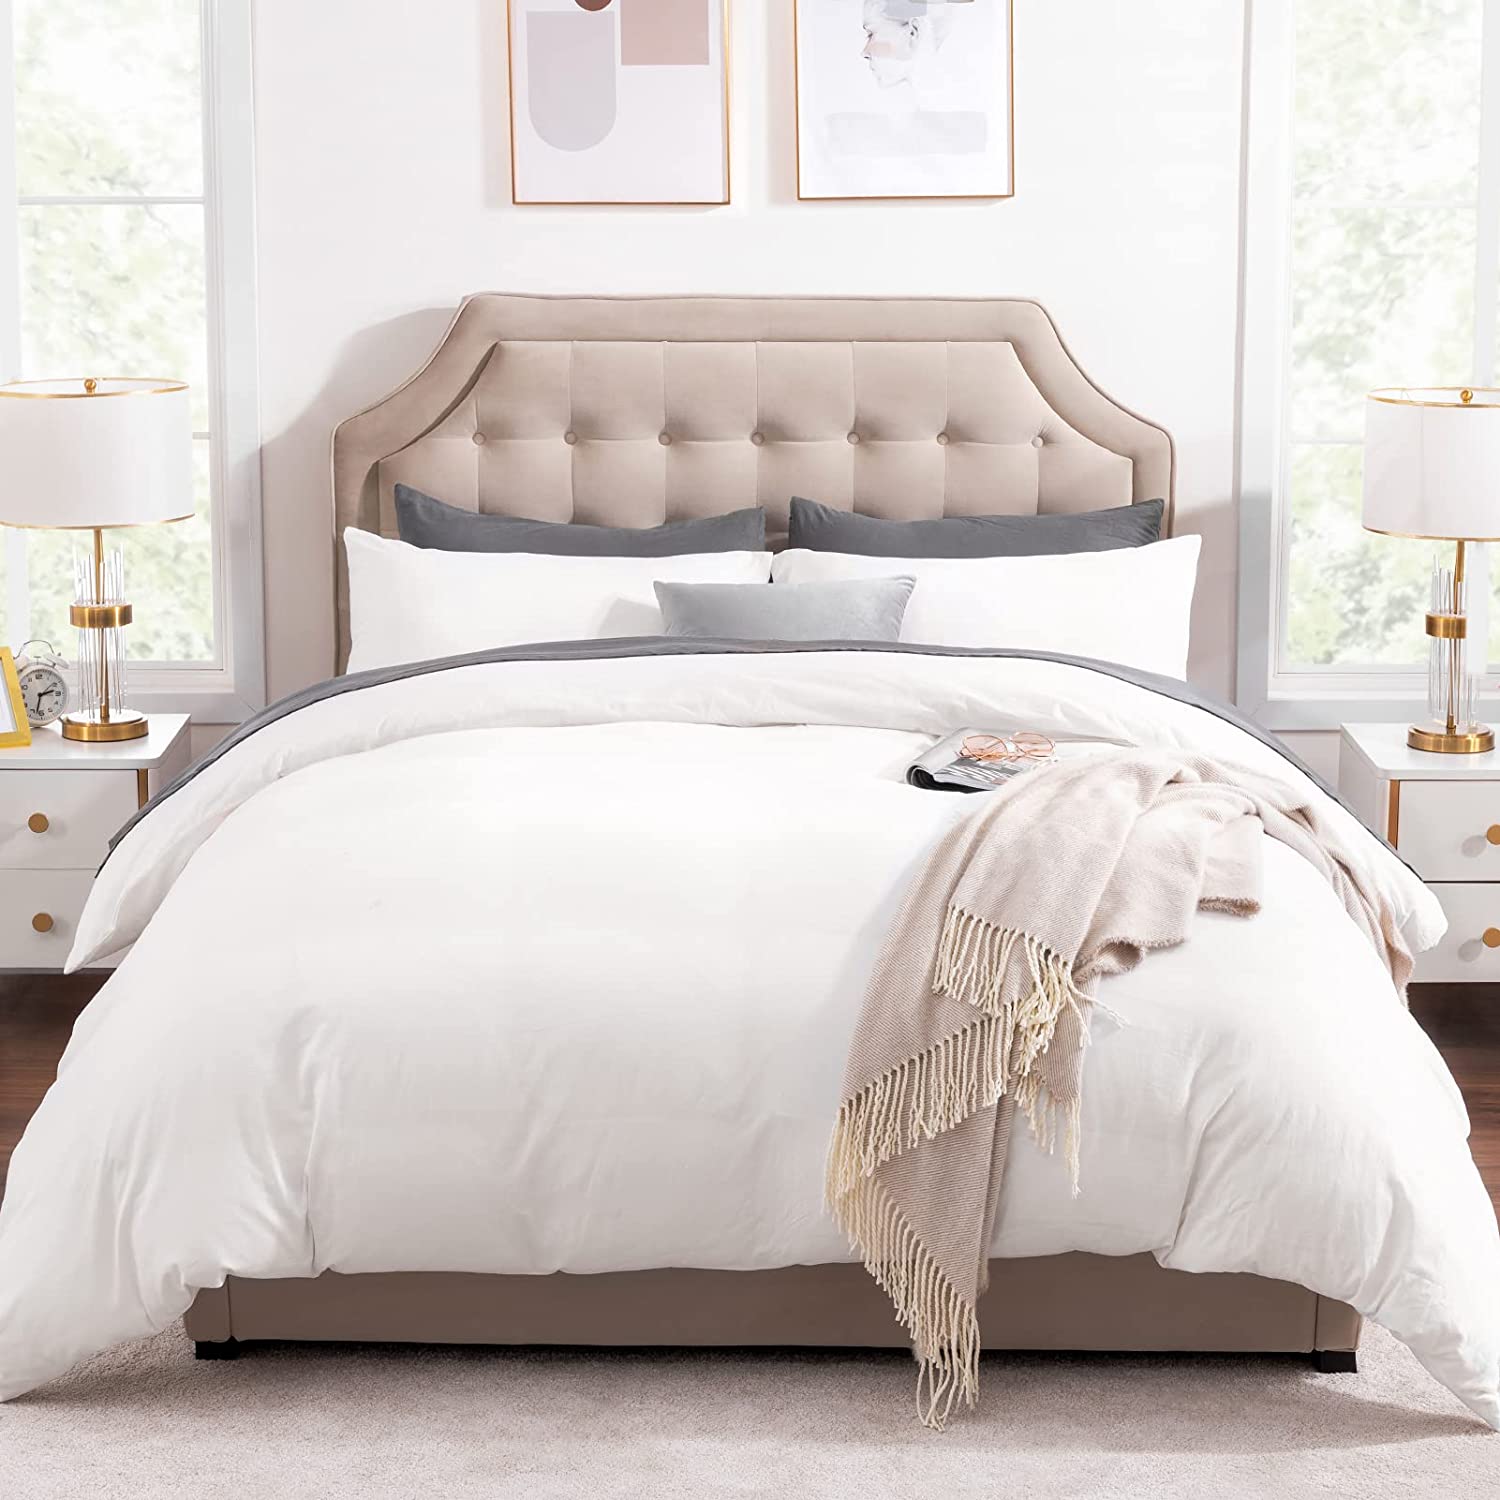 Price:$29.99  Duvet Cover Oeko-TEX Certified 100% Washed Cotton Duvet Cover Set 3 Pieces, Ultra Soft Bedding Comforter Cover with 2 Pillow Shams, Zipper Closure and Corner Ties(King, White) : Everything Else